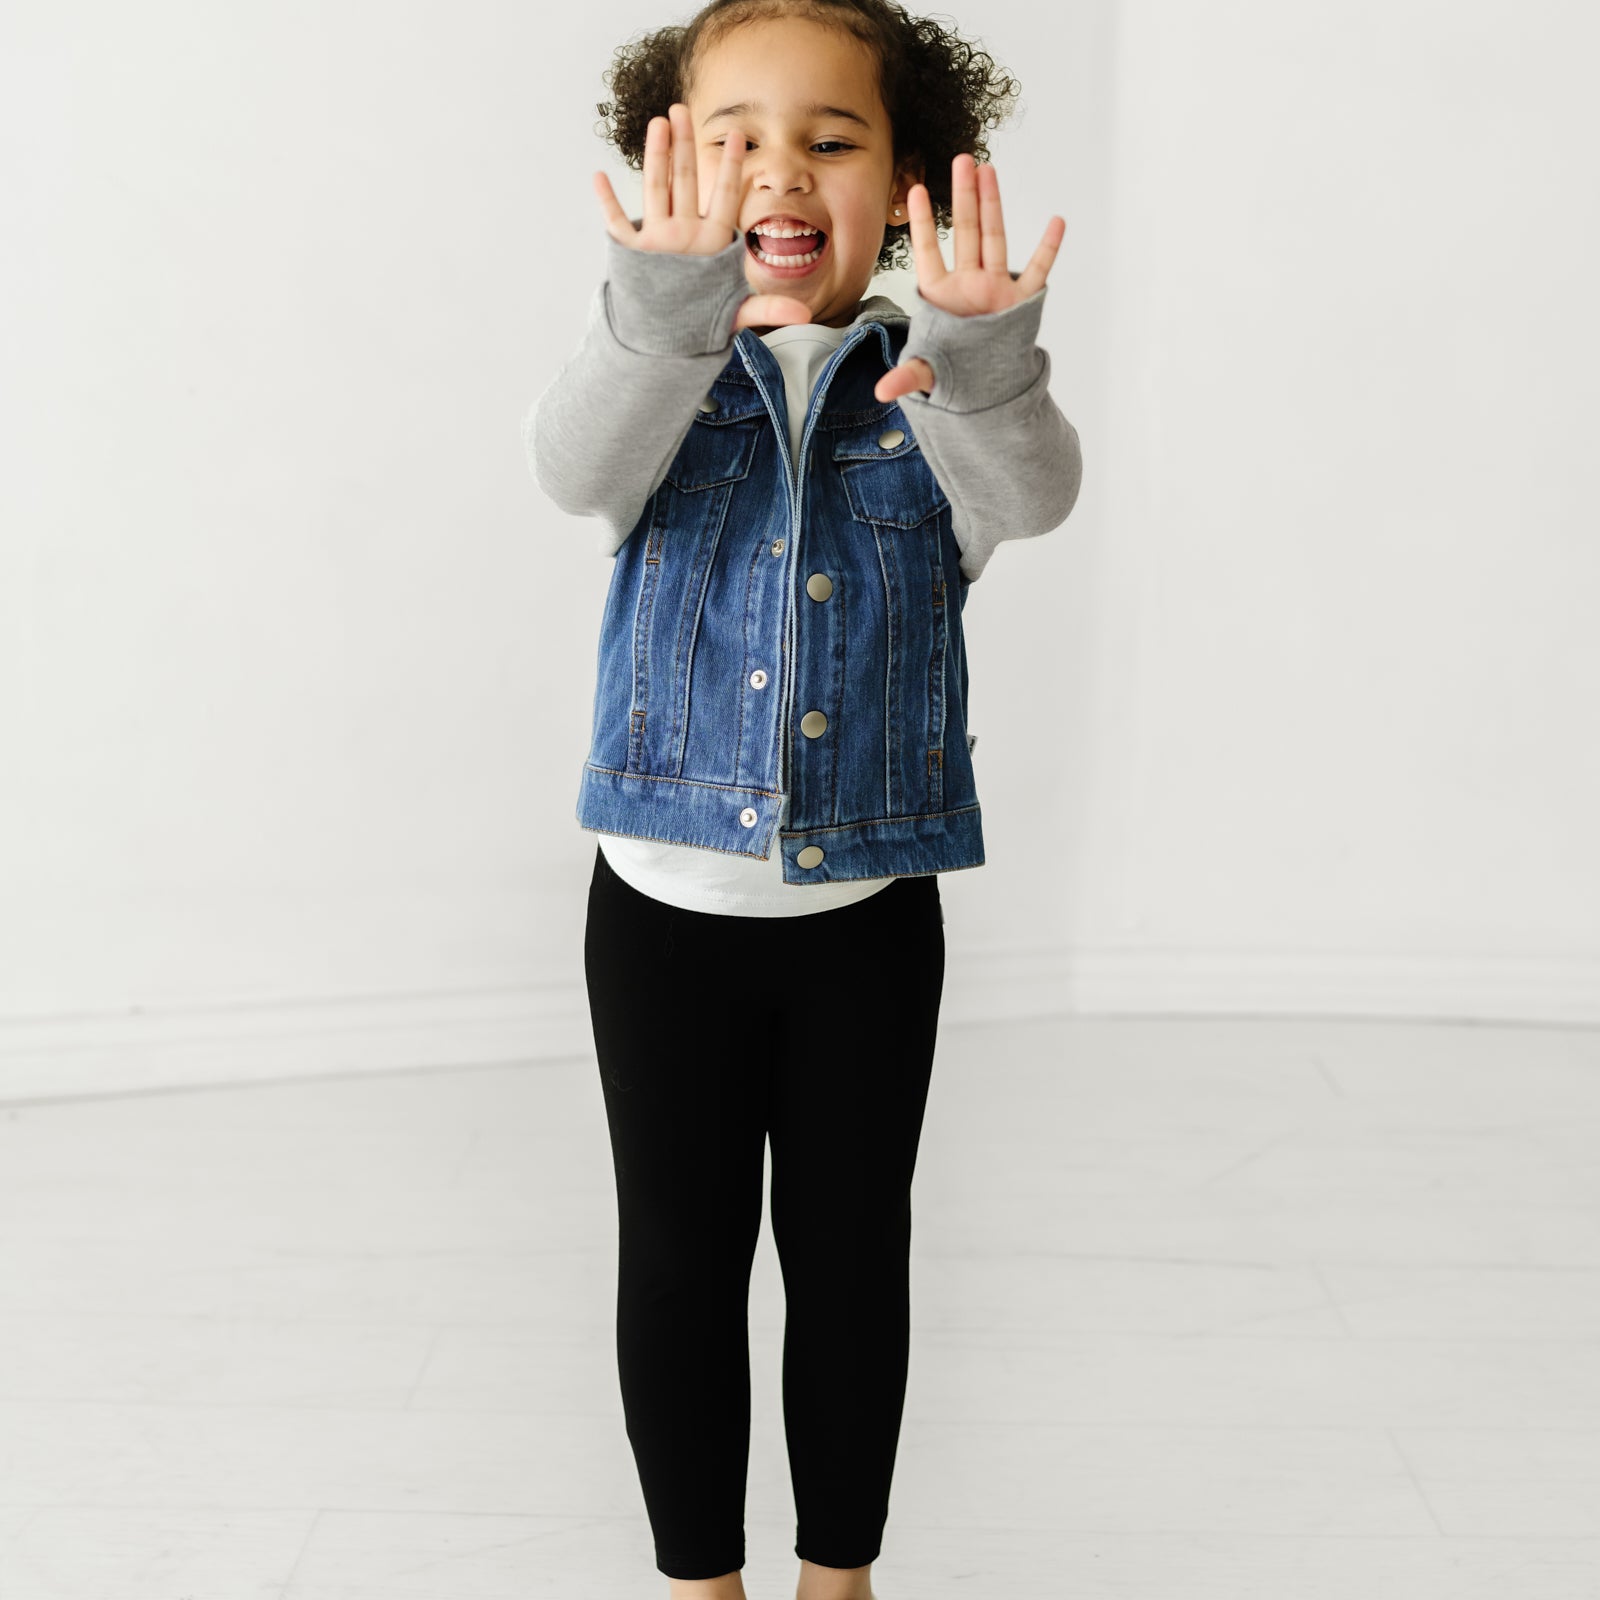 Child wearing a Midwash Blue Denim jacket and coordinating Play outfit showing the thumbholes on the jacket sleeve cuffs